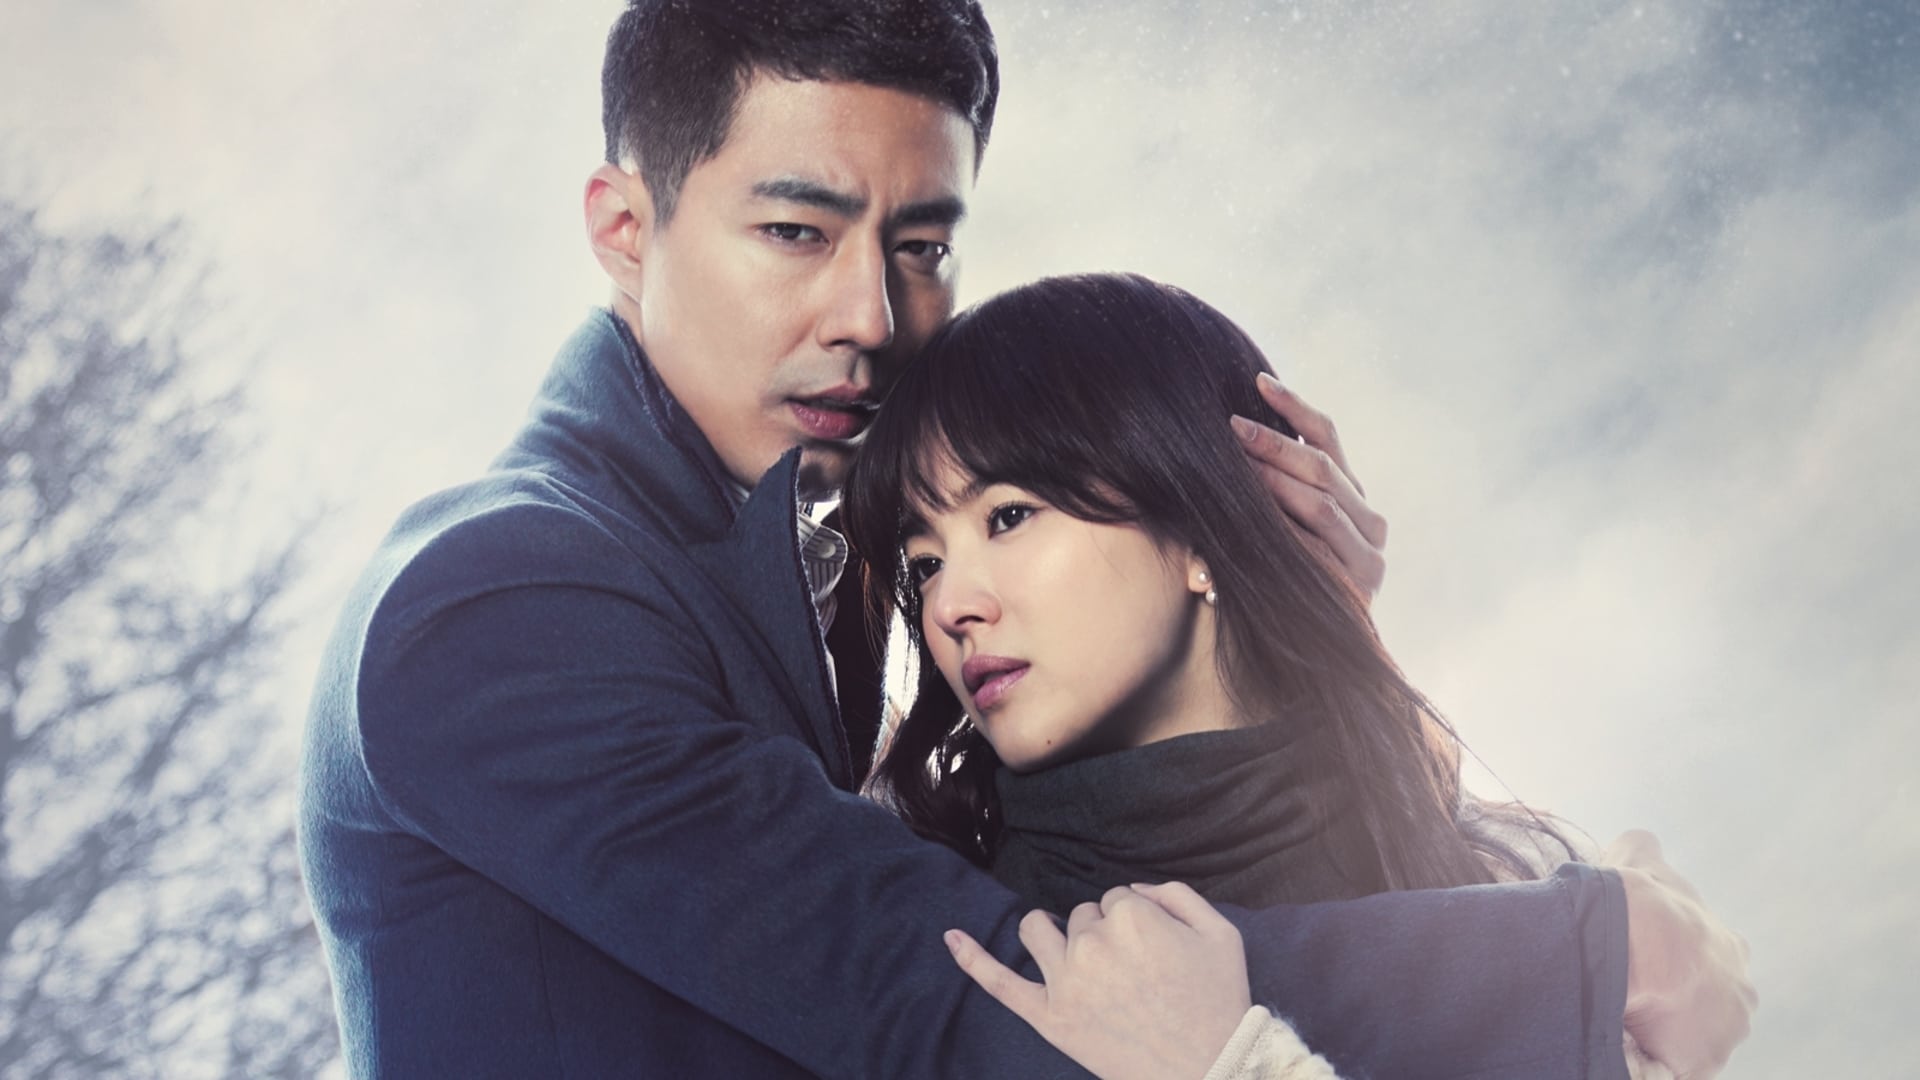 That Winter, the Wind Blows izle